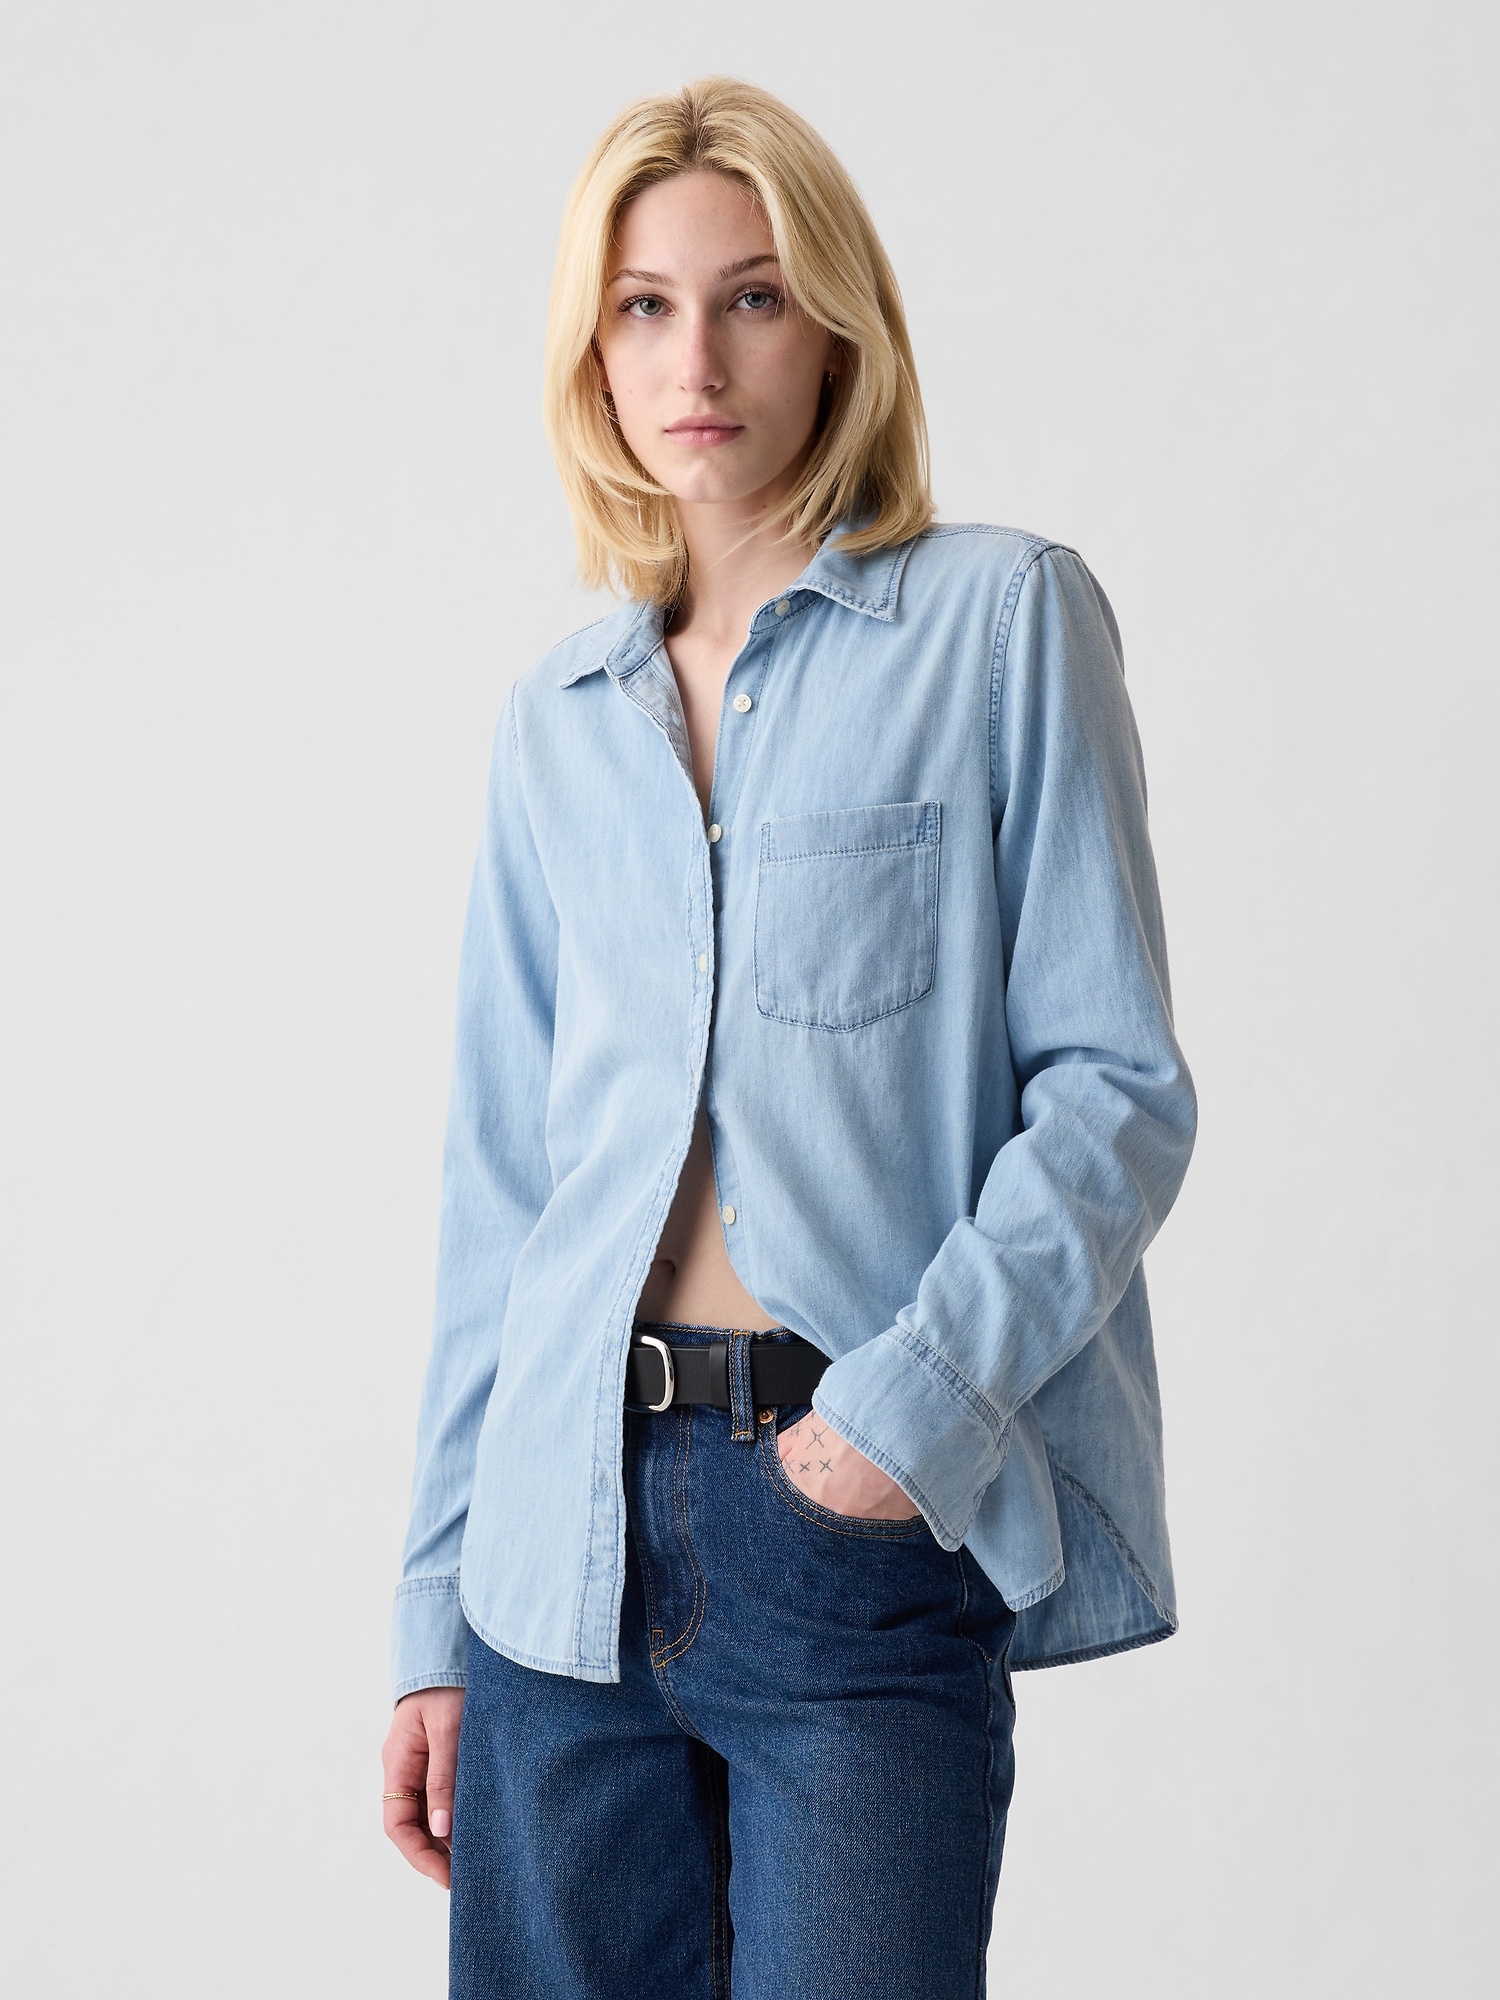 Port & Company - Ladies Long Sleeve Value Denim Shirt M Faded Blue* at  Amazon Women's Clothing store: Button Down Shirts